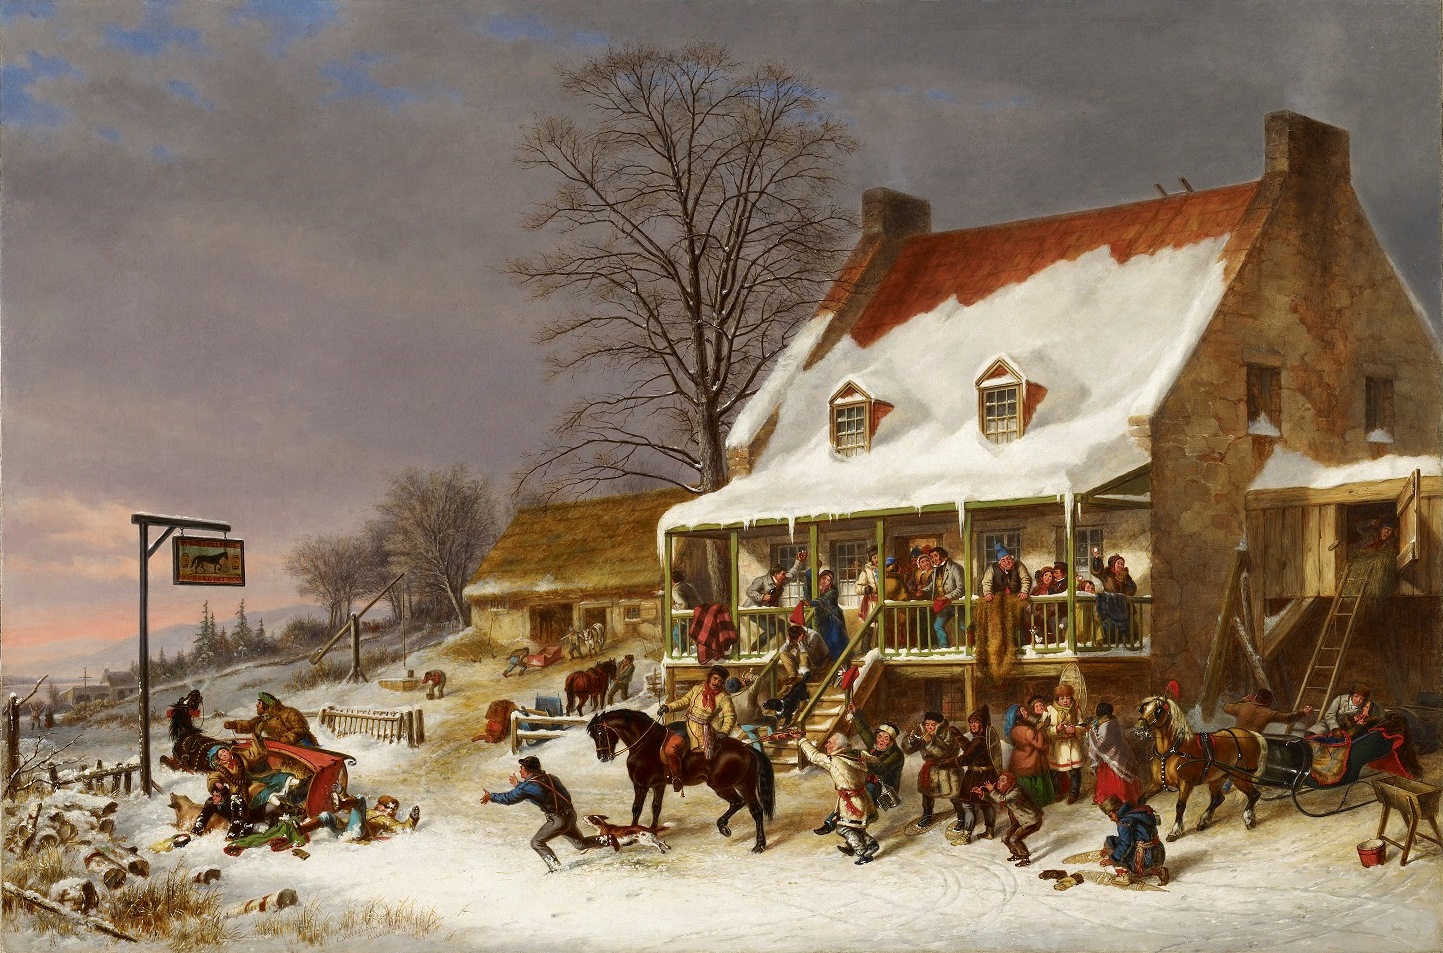 A crowd of revelers outside of a house in a winter scene